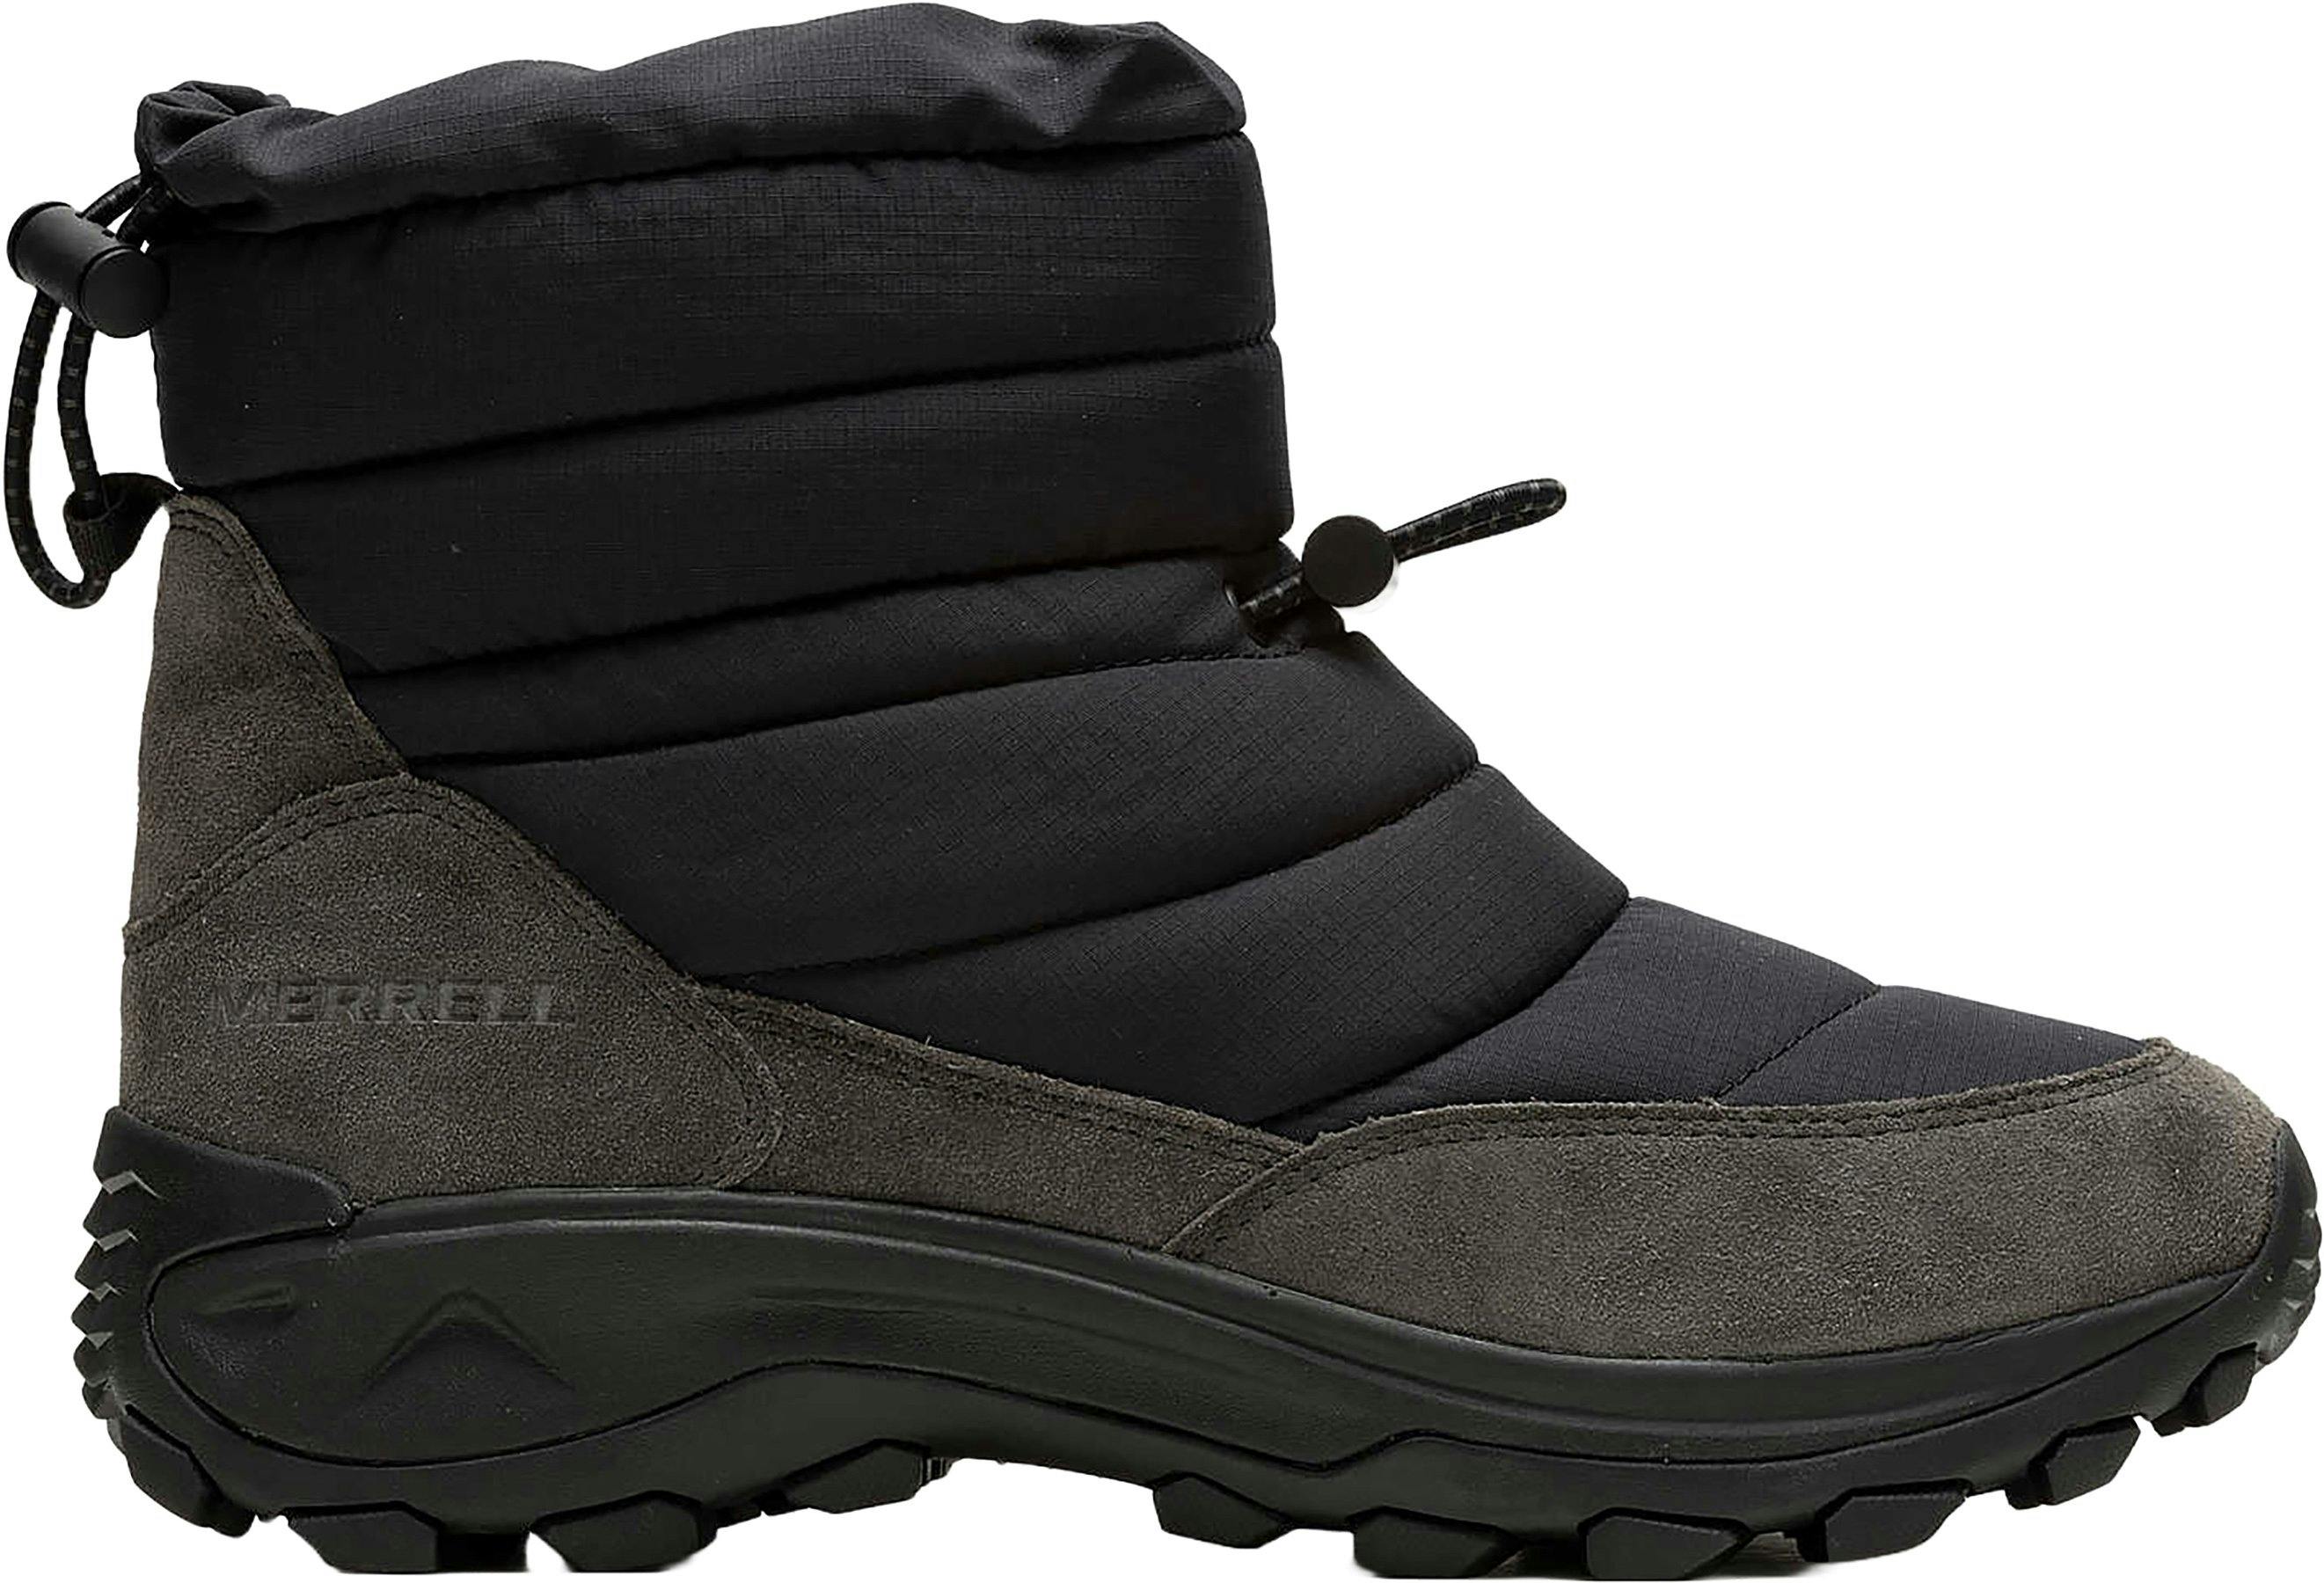 Product image for Winter Moc Zero Boots [Tall] - Men's